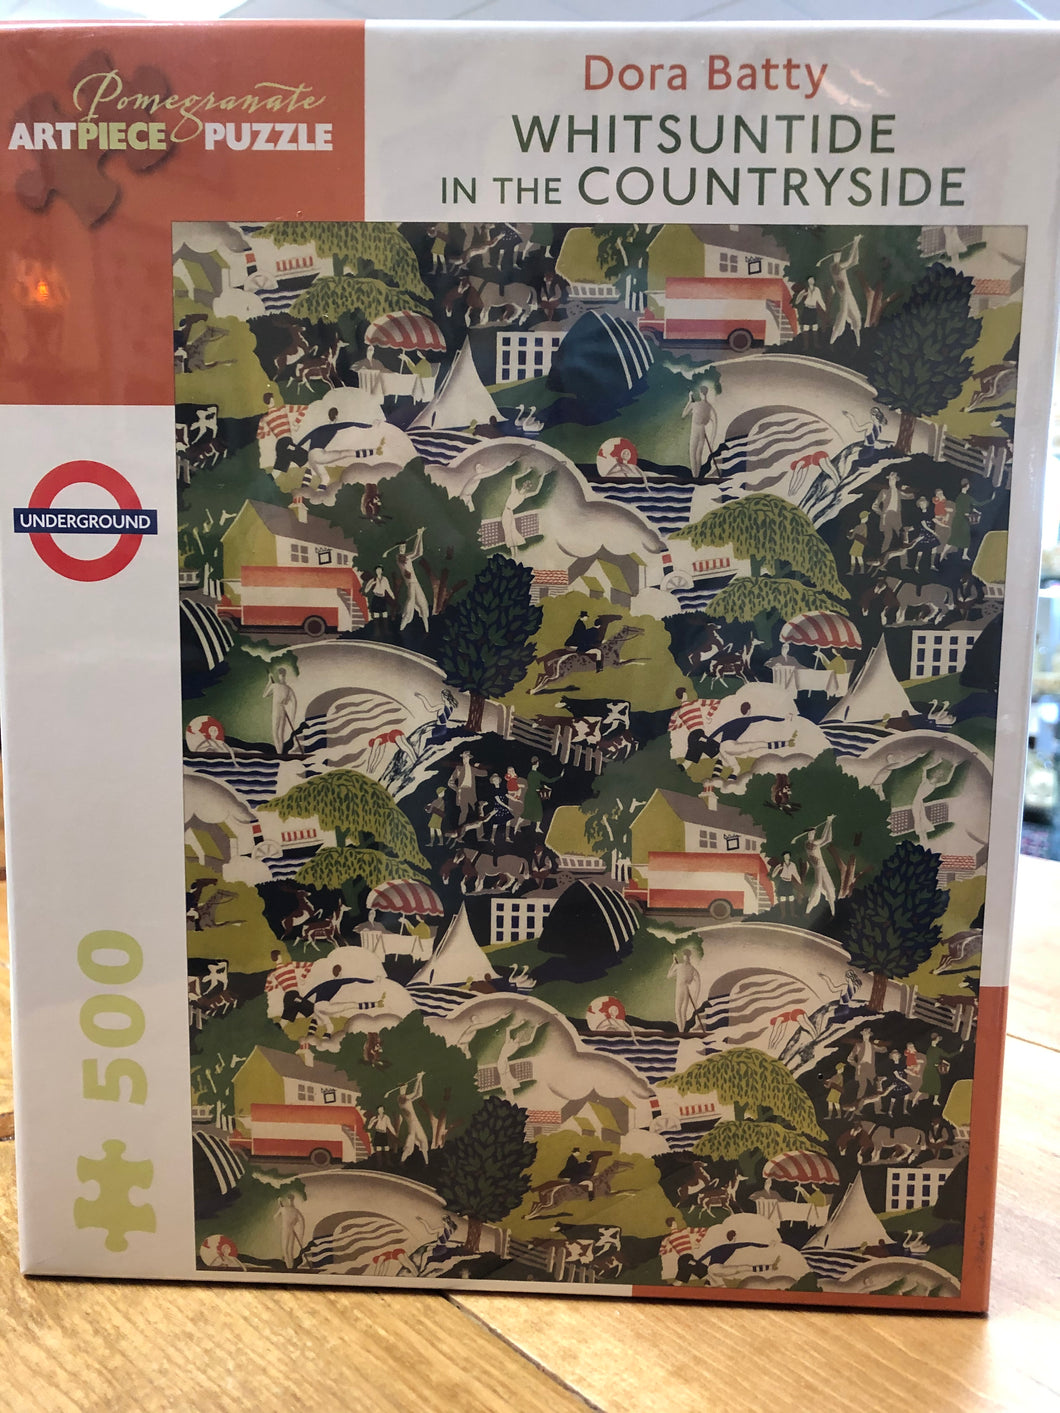 Whitsuntide in the Countryside Puzzle- Dora Batty